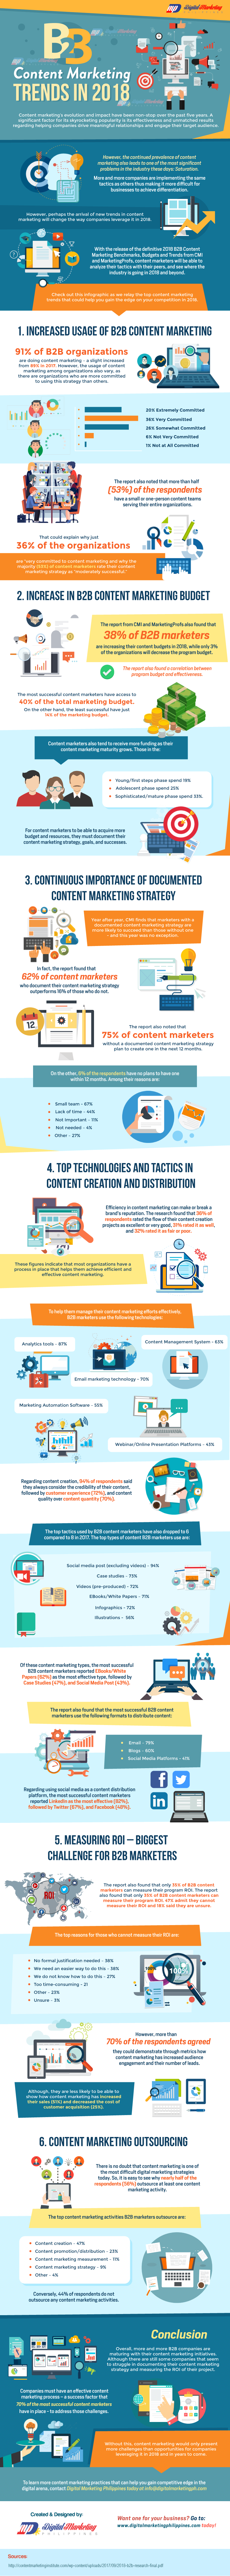 B2B Content Marketing Trends in 2018-01